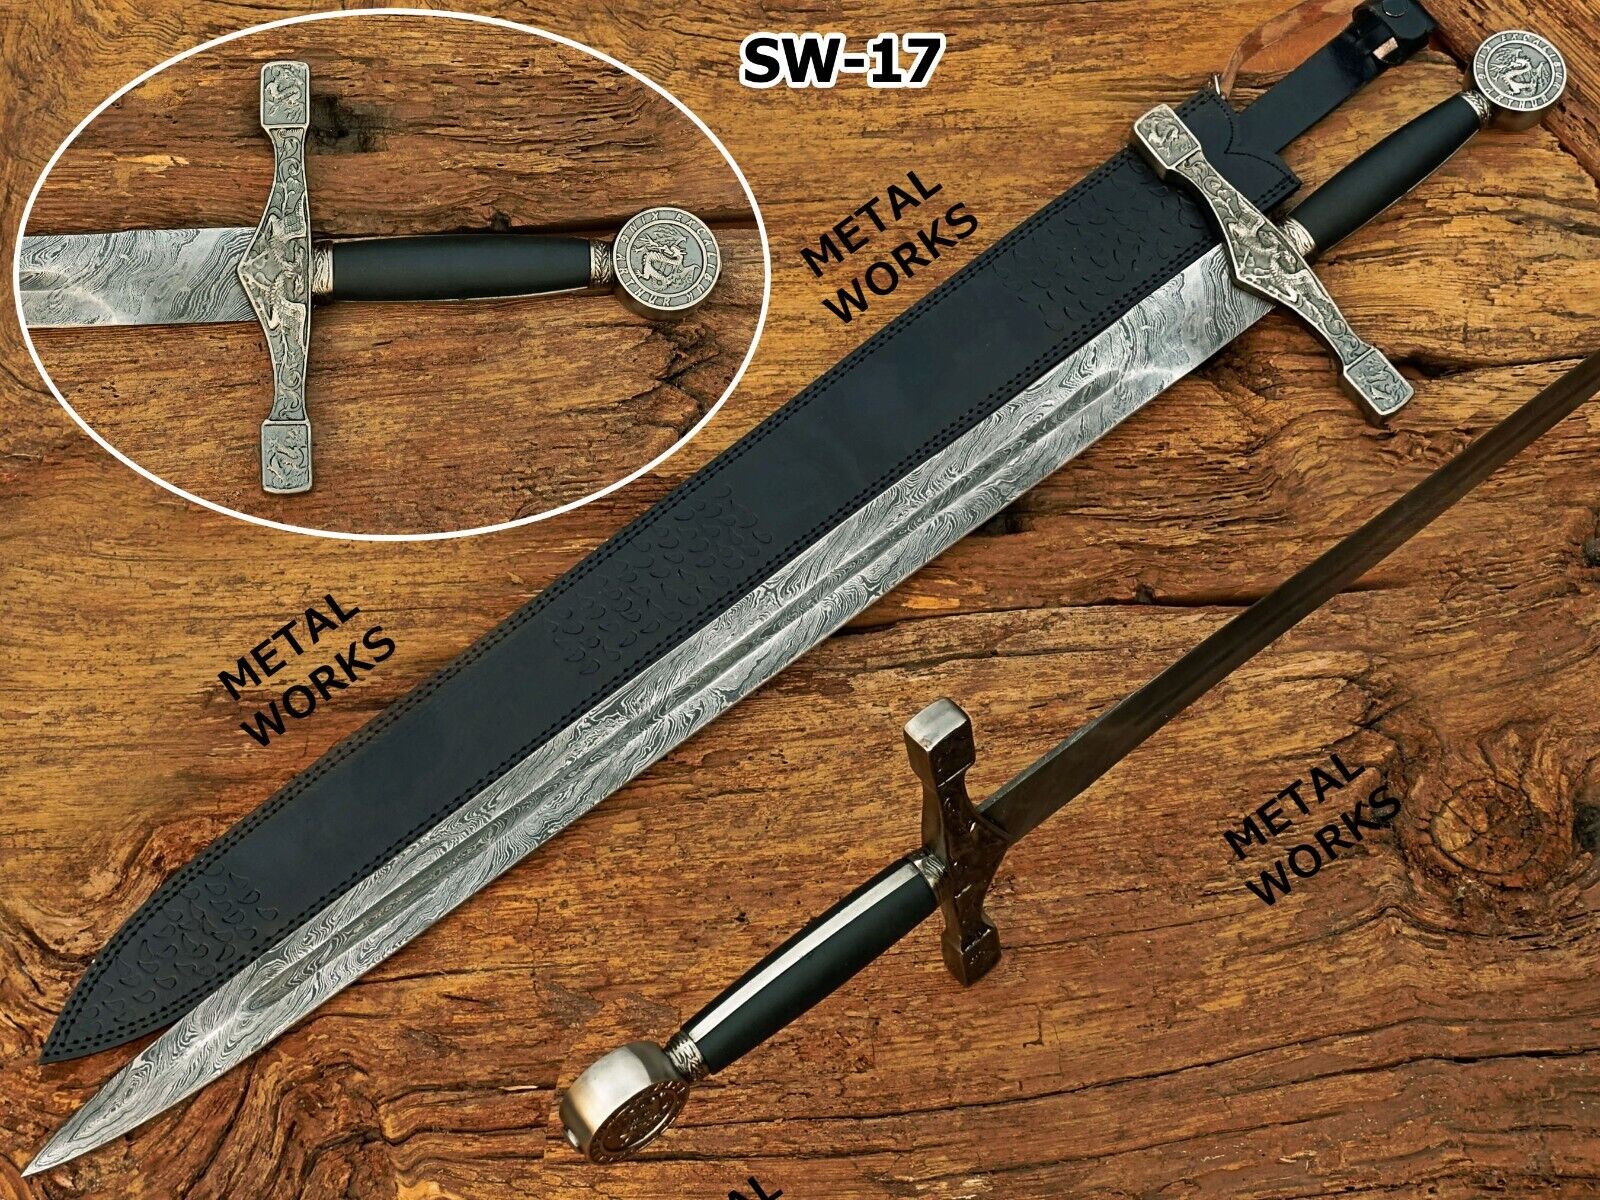 Handmade Damascus Steel Excalibur Sword/King Arthur sword With Leather Cover.